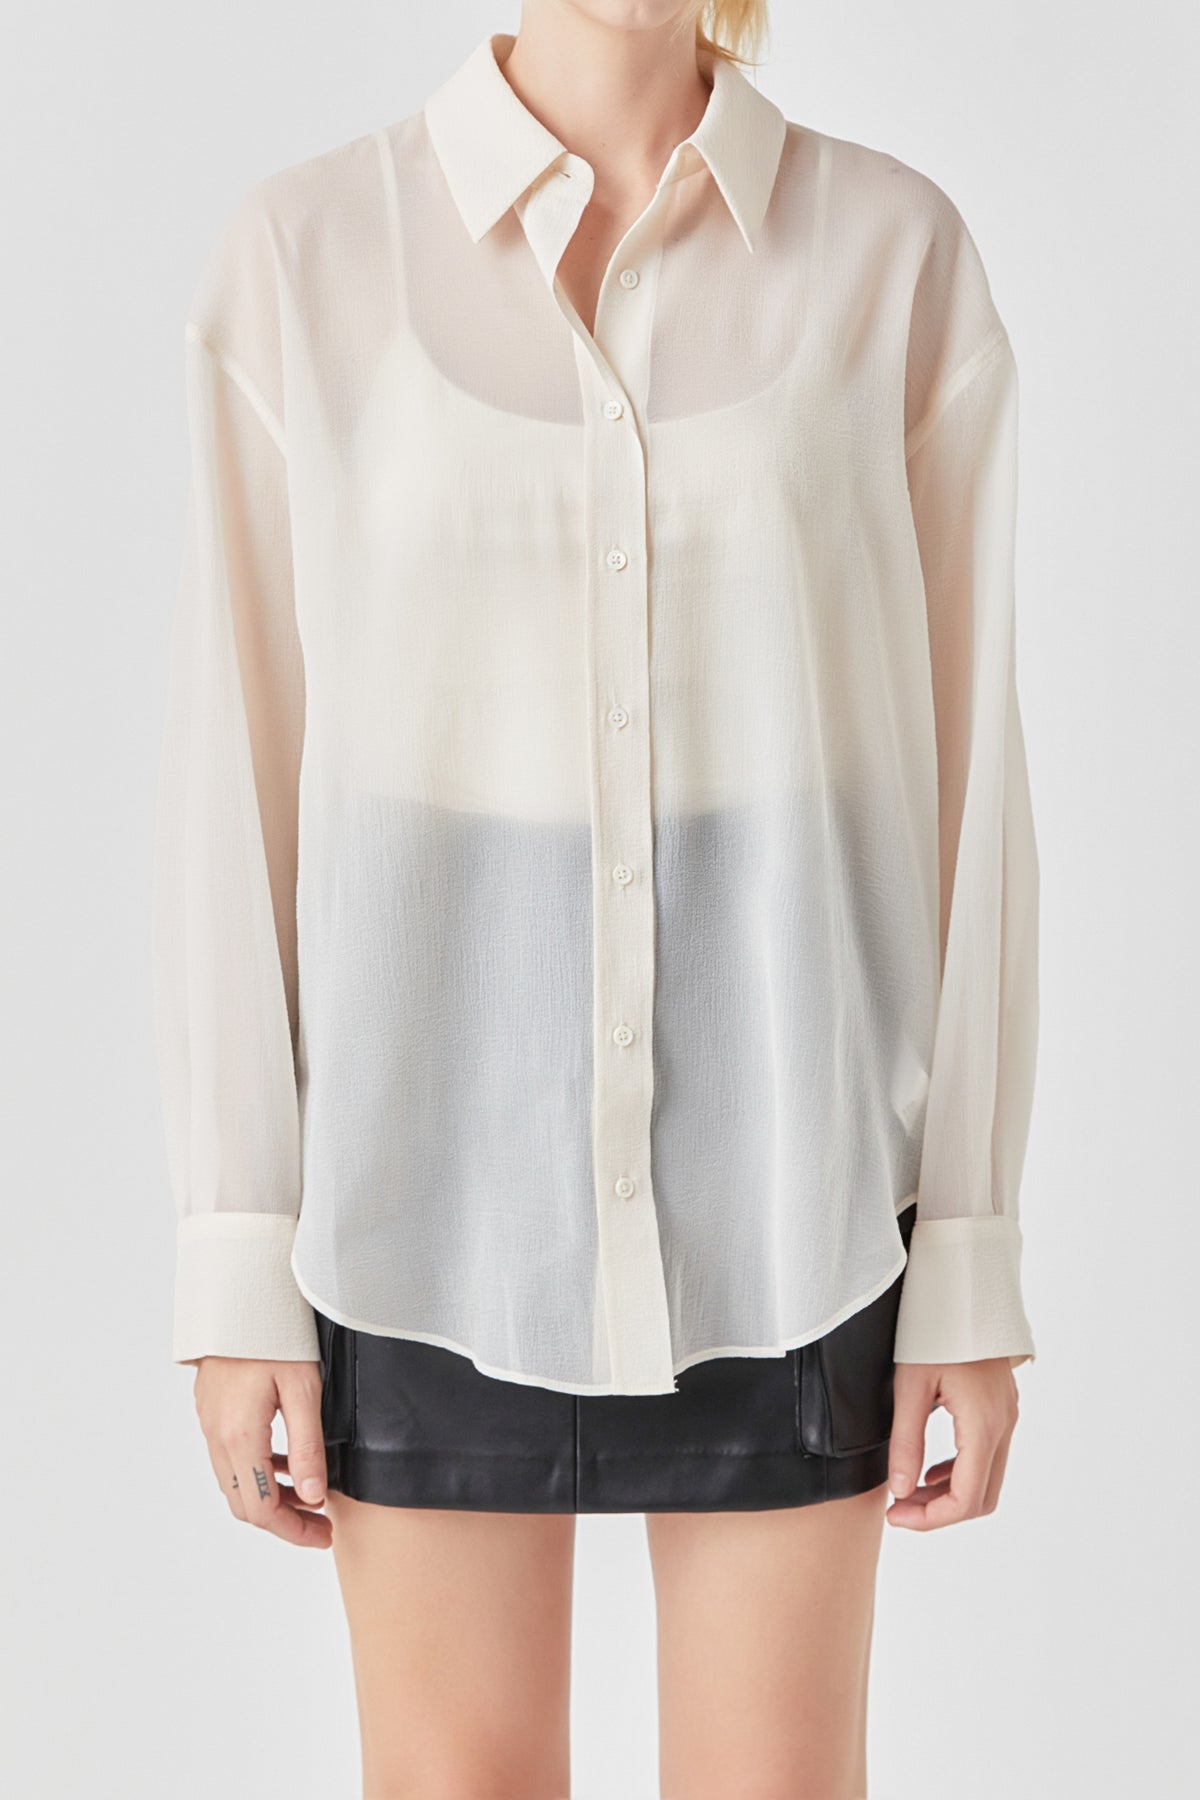 GREY LAB - Organza Oversized Shirt - SHIRTS & BLOUSES available at Objectrare